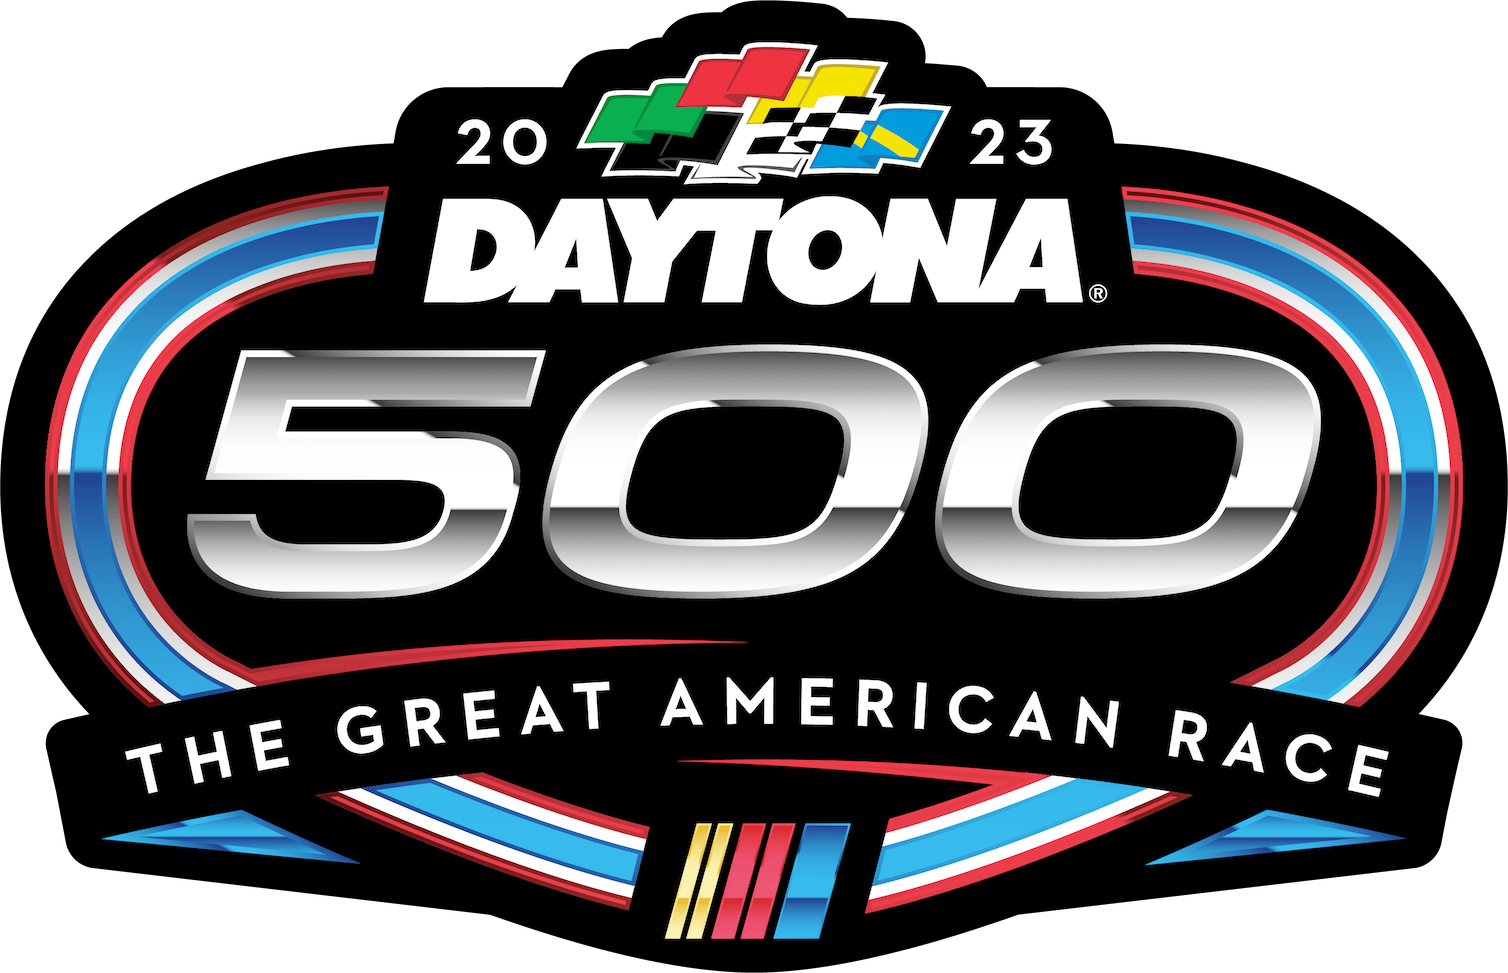 Daytona 500 live stream 2023 how to watch NASCAR online from anywhere today, weather conditions